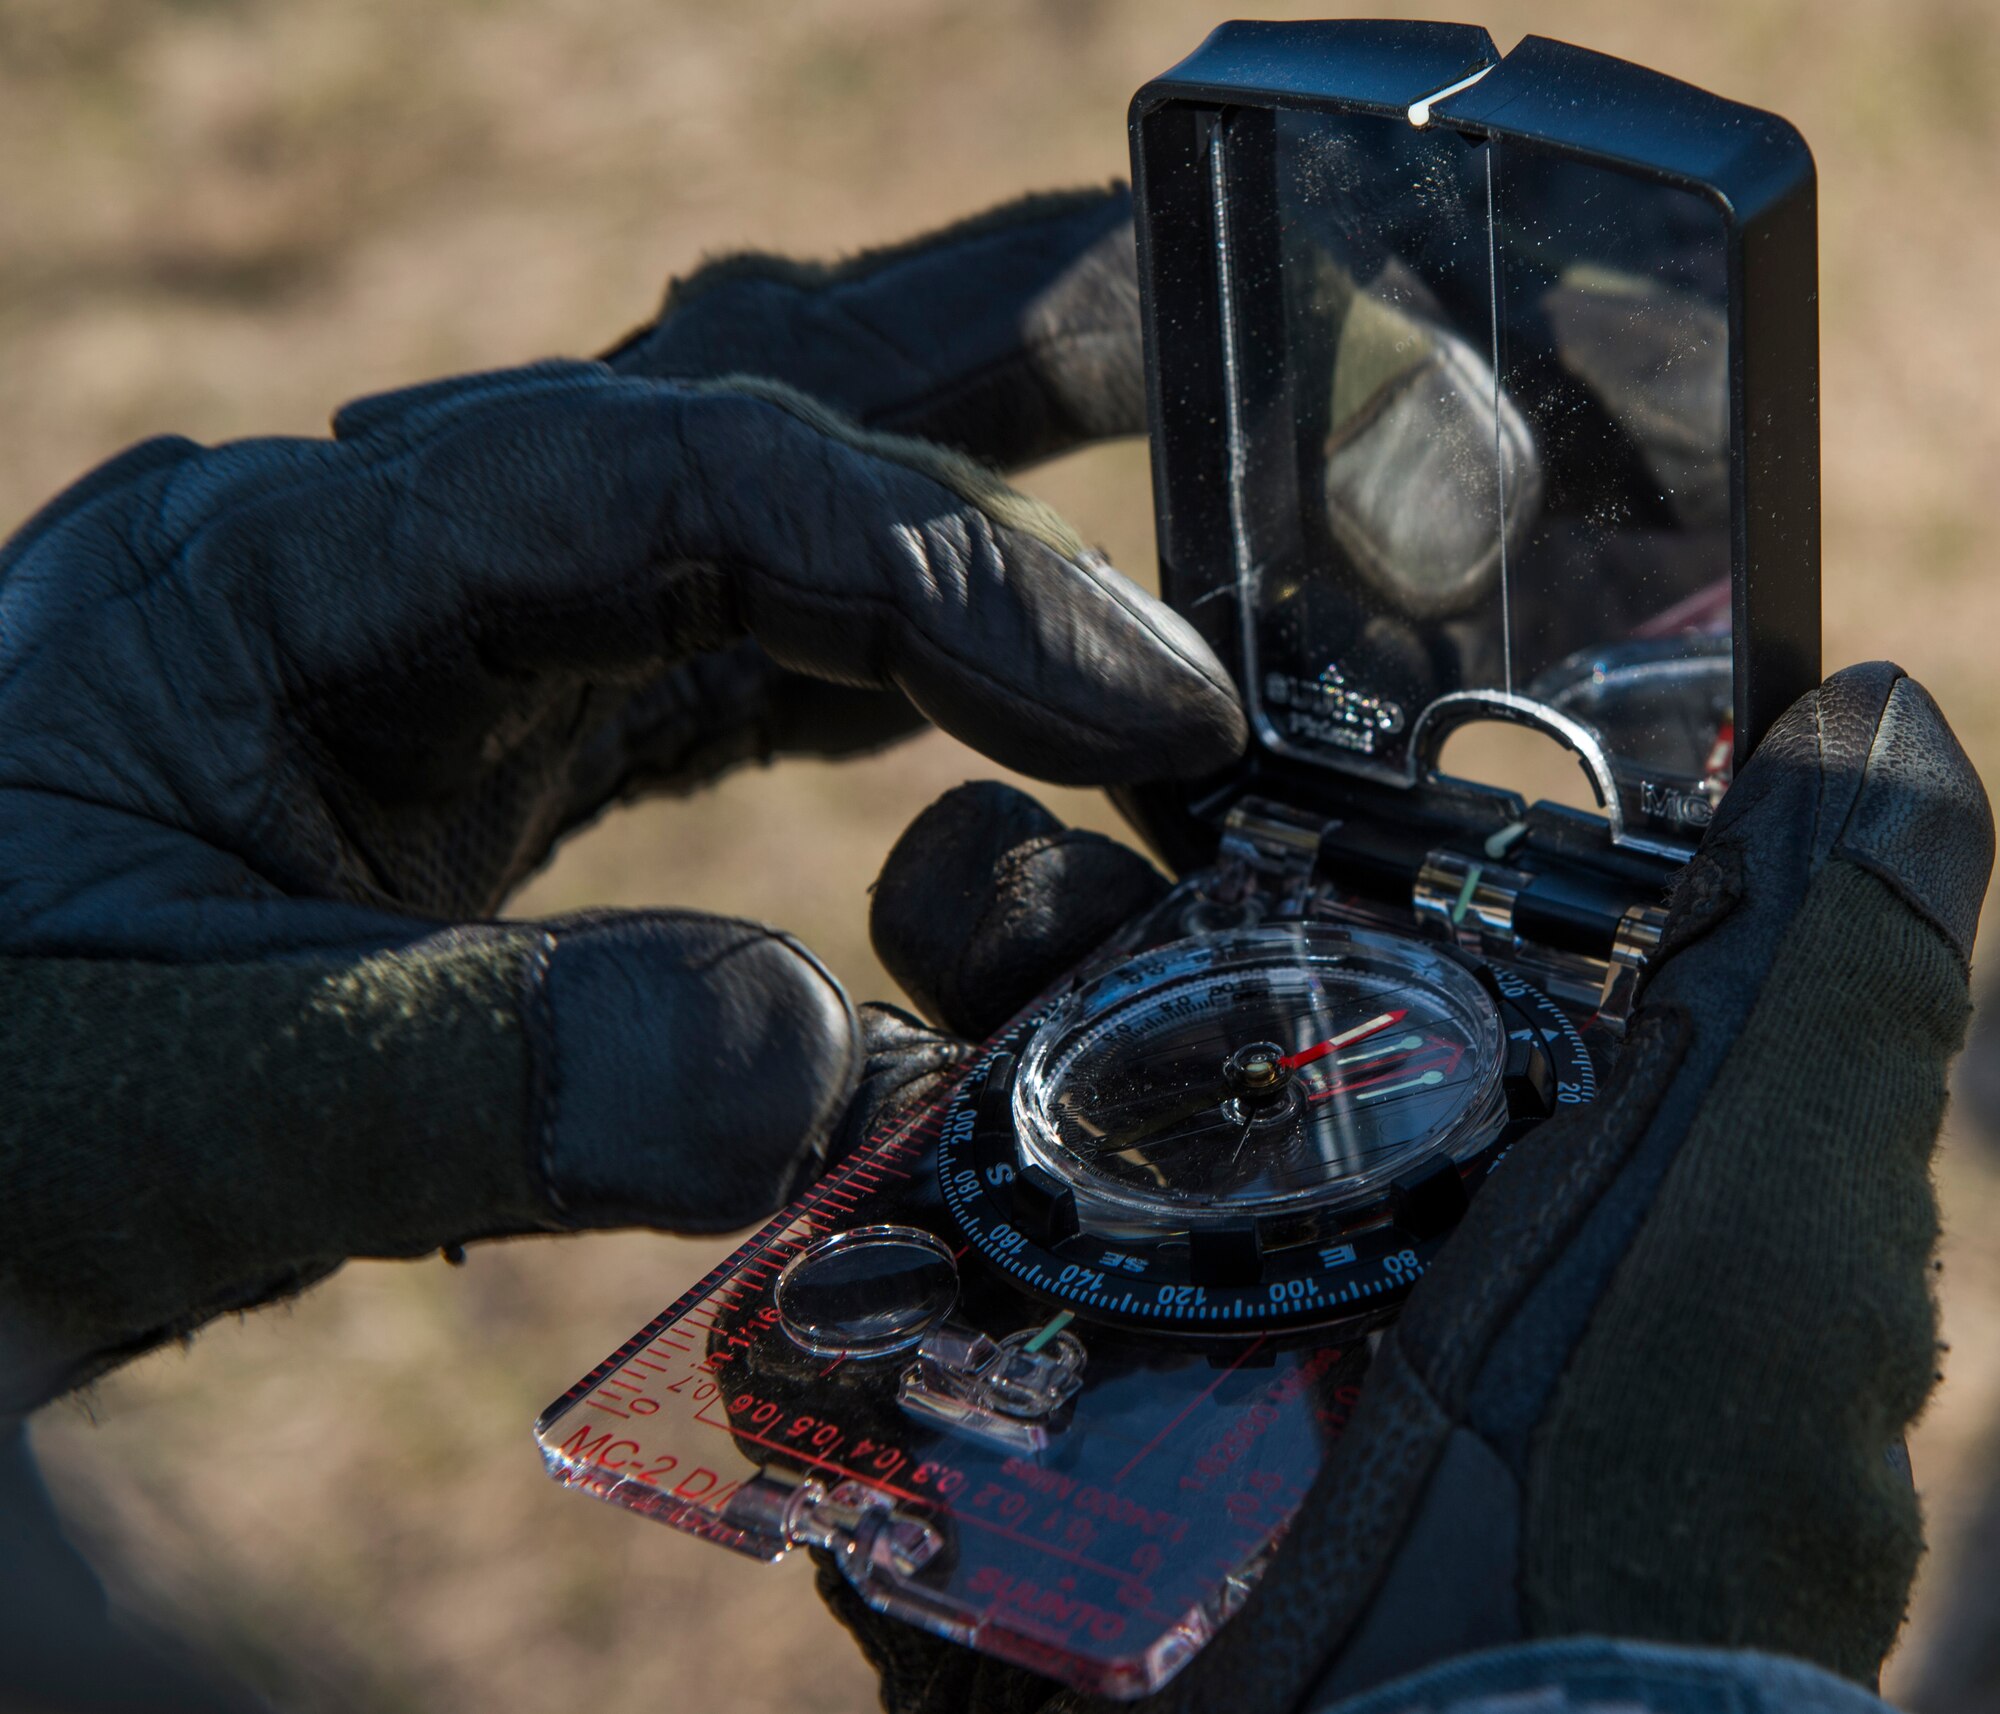 A member of the 817th Contingency Response Group reads a compass during a training exercise at the Joint Readiness Training Center at Fort Polk, La., Jan. 17, 2015. JRTC is a 34th Combat Training Squadron exercise for the U.S. Army that improves unit readiness by providing realistic, stressful, joint and combined arms training across the full spectrum of conflict. The Airmen helped support the exercise, and also provided an opportunity for internal training. (U.S. Air Force photo/Staff Sgt. Gustavo Gonzalez/RELEASED)